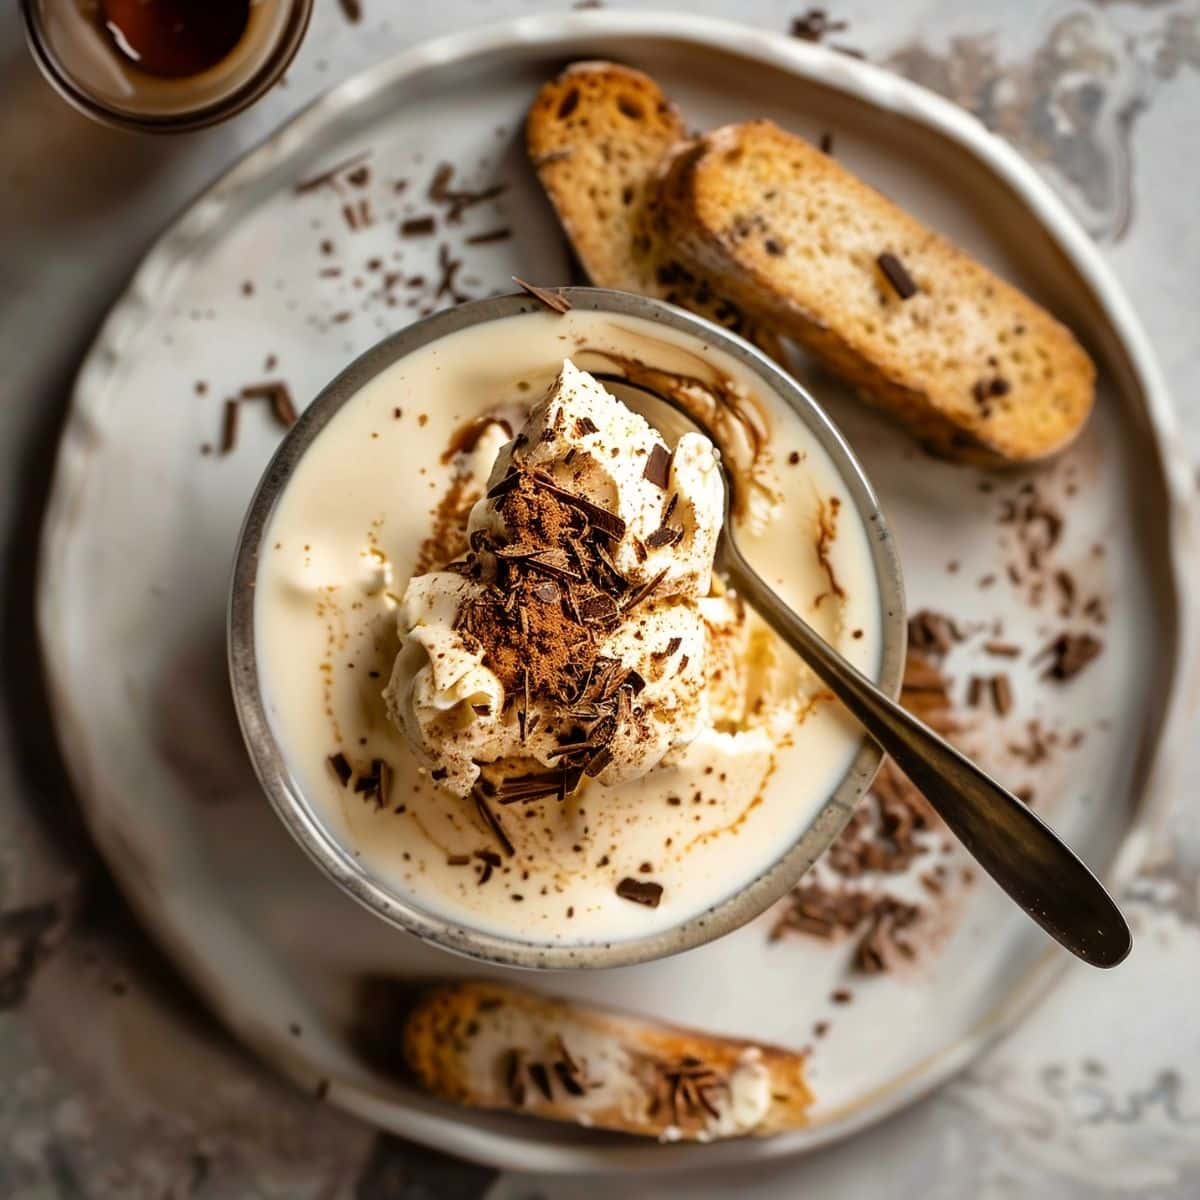 Top View Affogato in a Glass Mug on a Grey Plate with Biscotti, Chocolate Shavings, and a Spoon